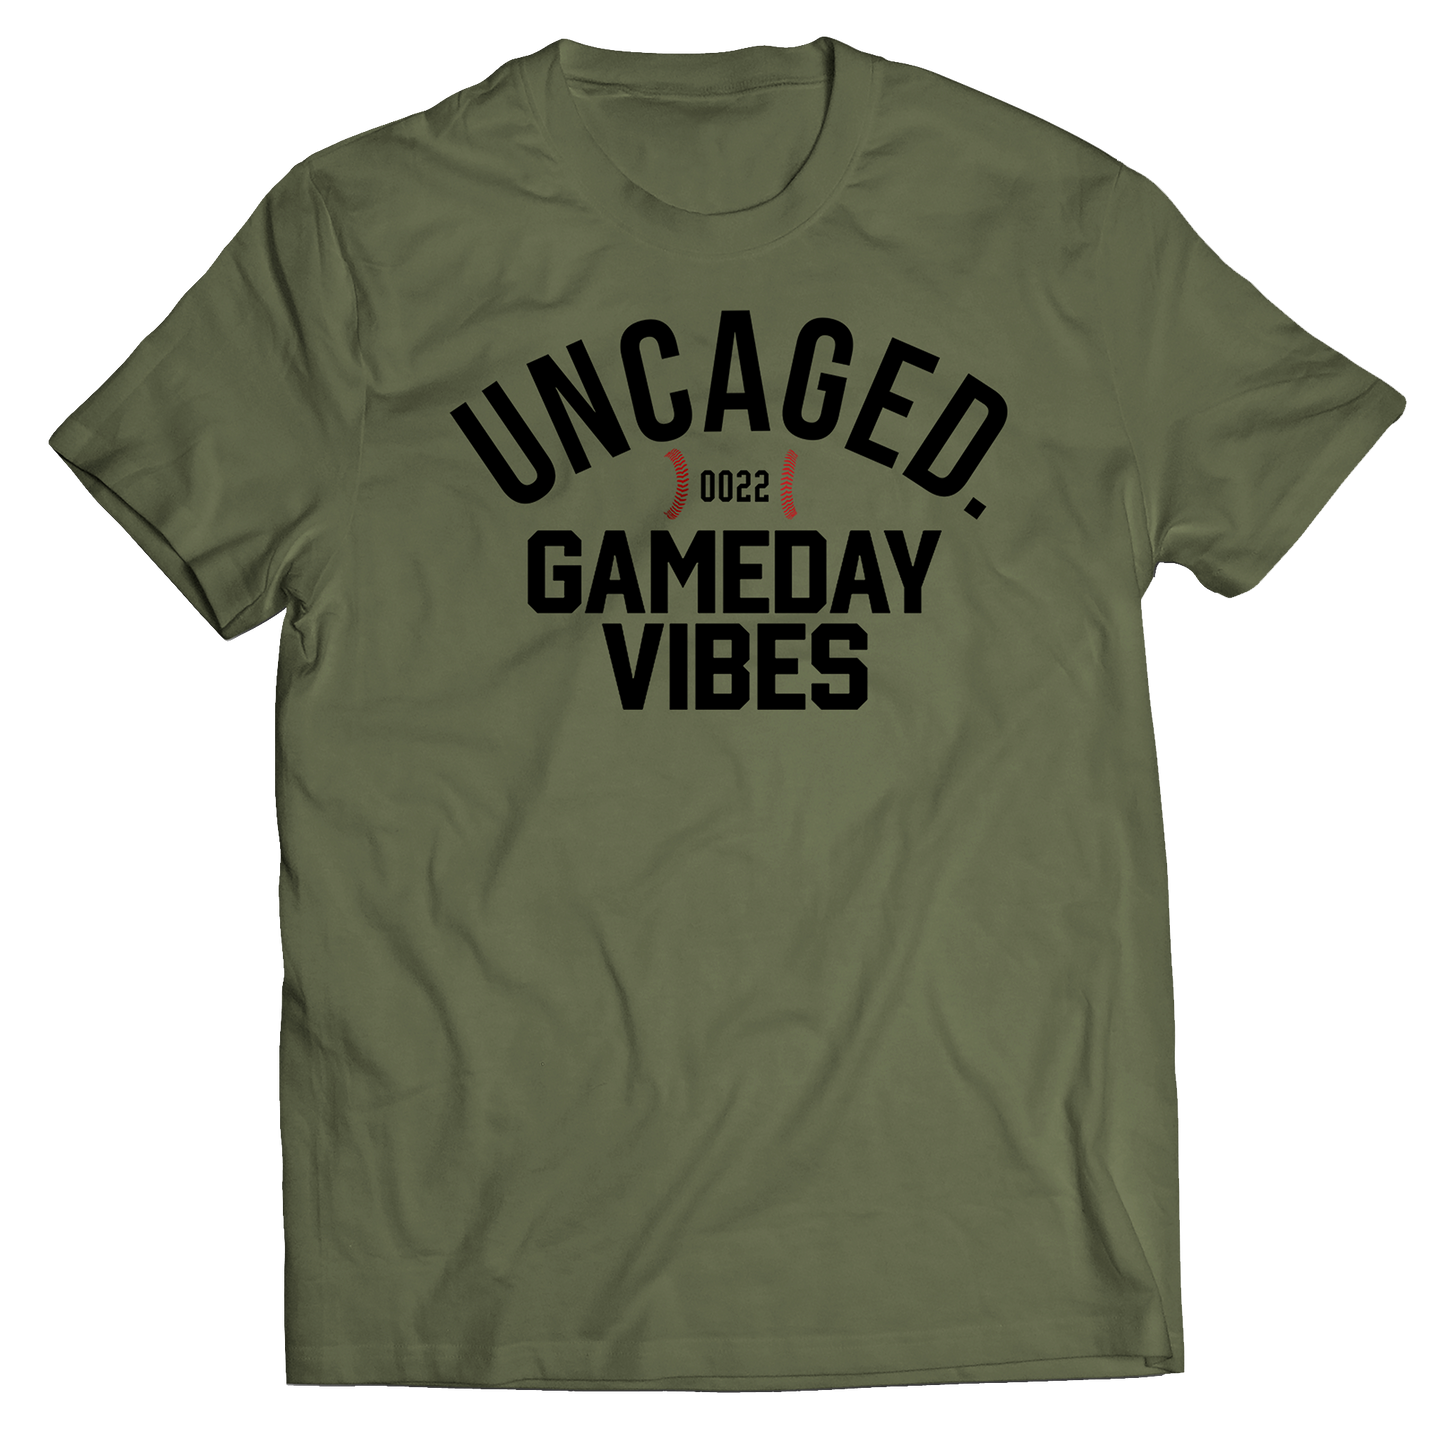 Gameday Vibes T-Shirt - Olive